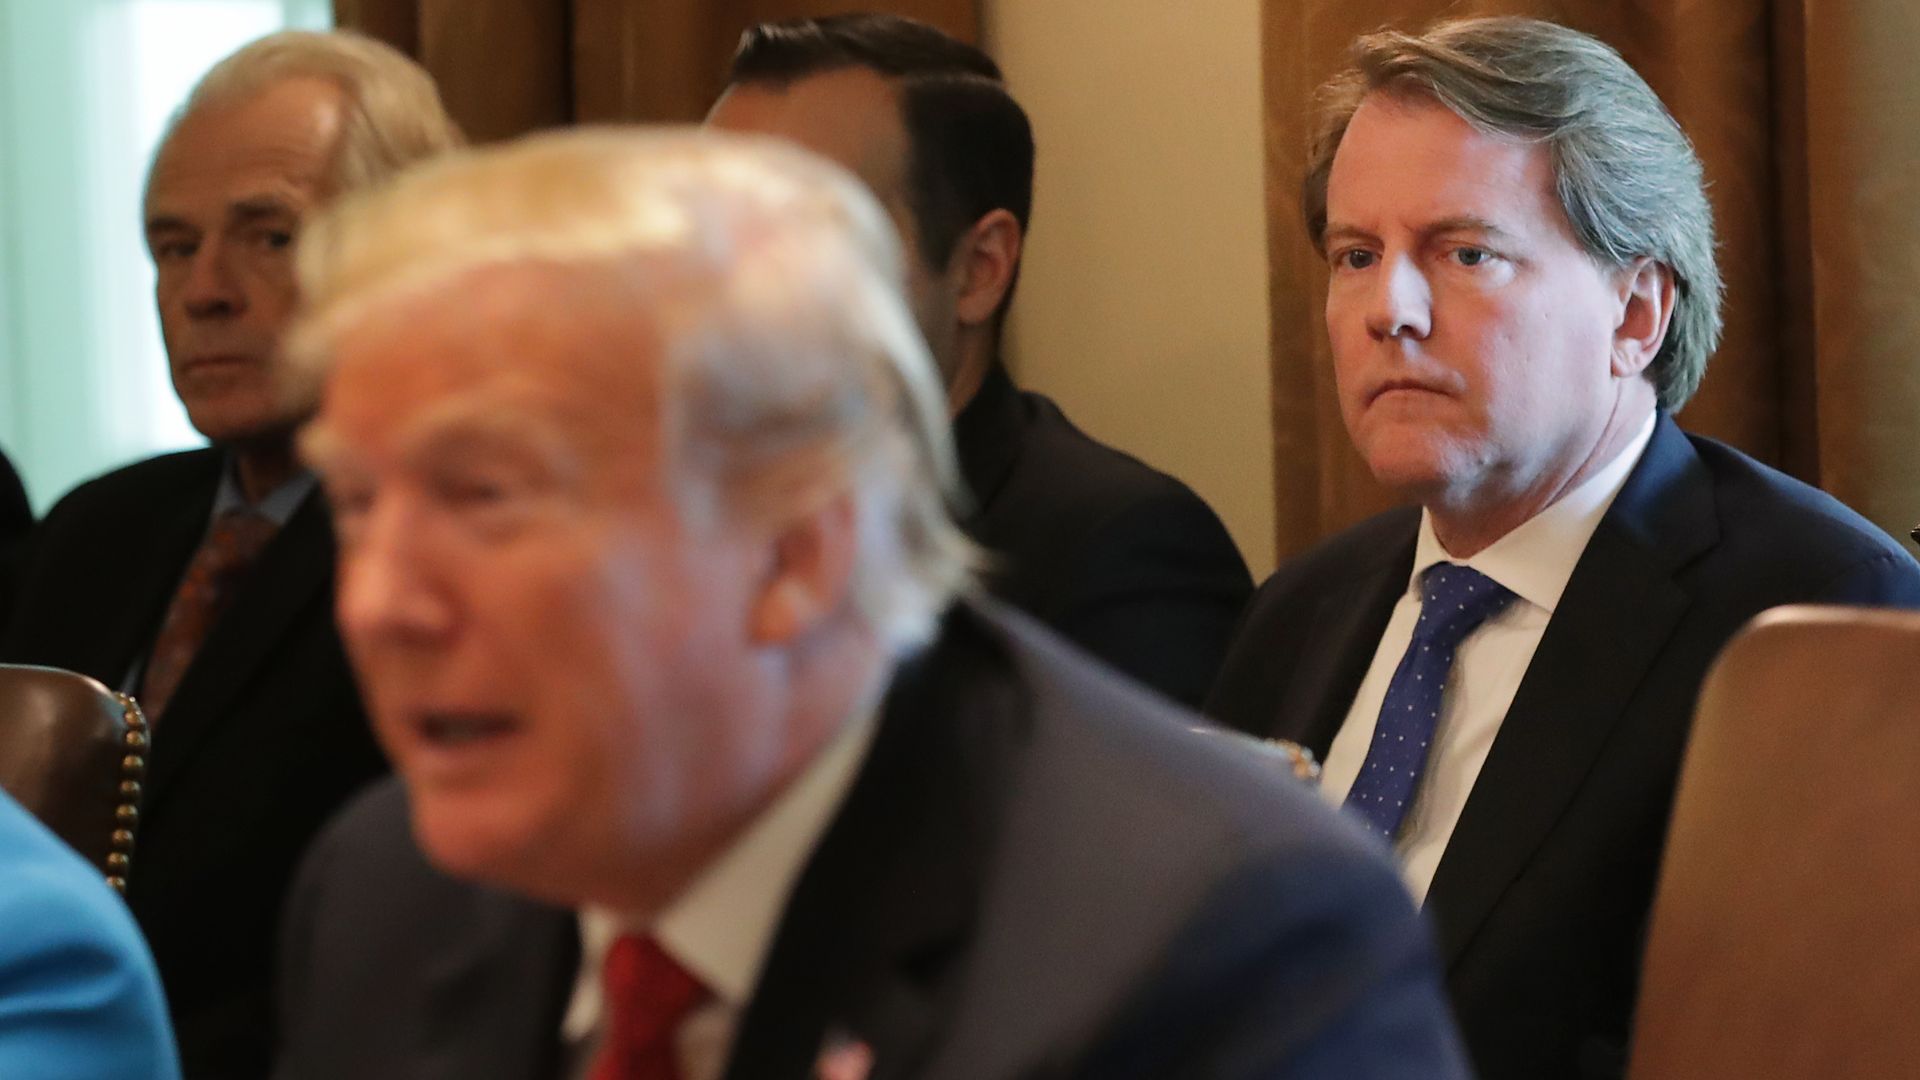 Don McGahn sits behind President Trump, both are wearing suits